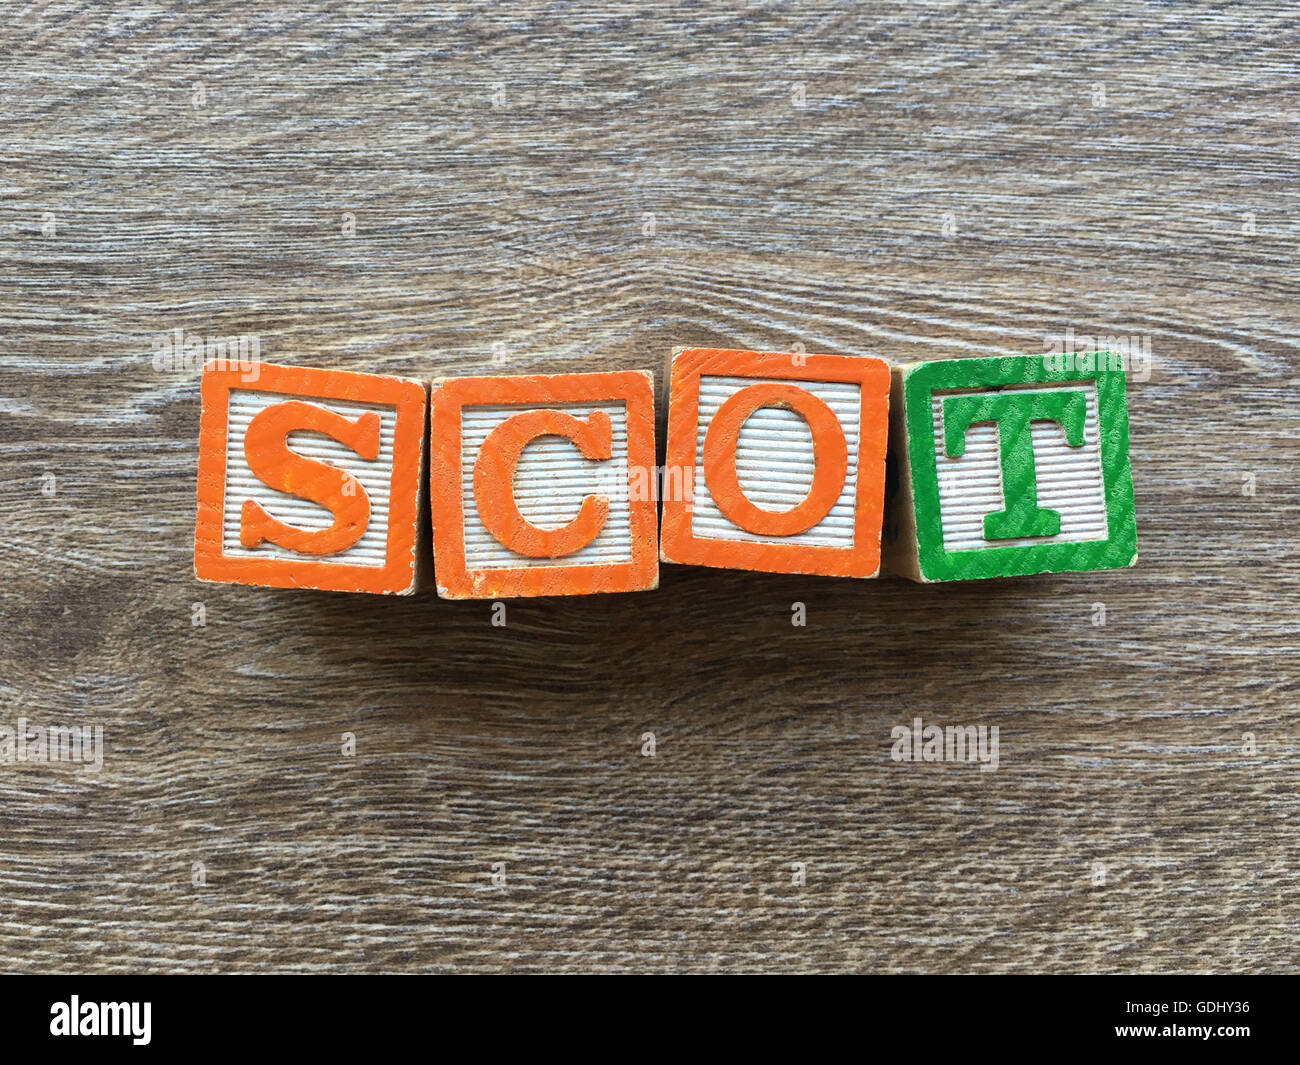 SCOT word written with wood block letter toys Stock Photo